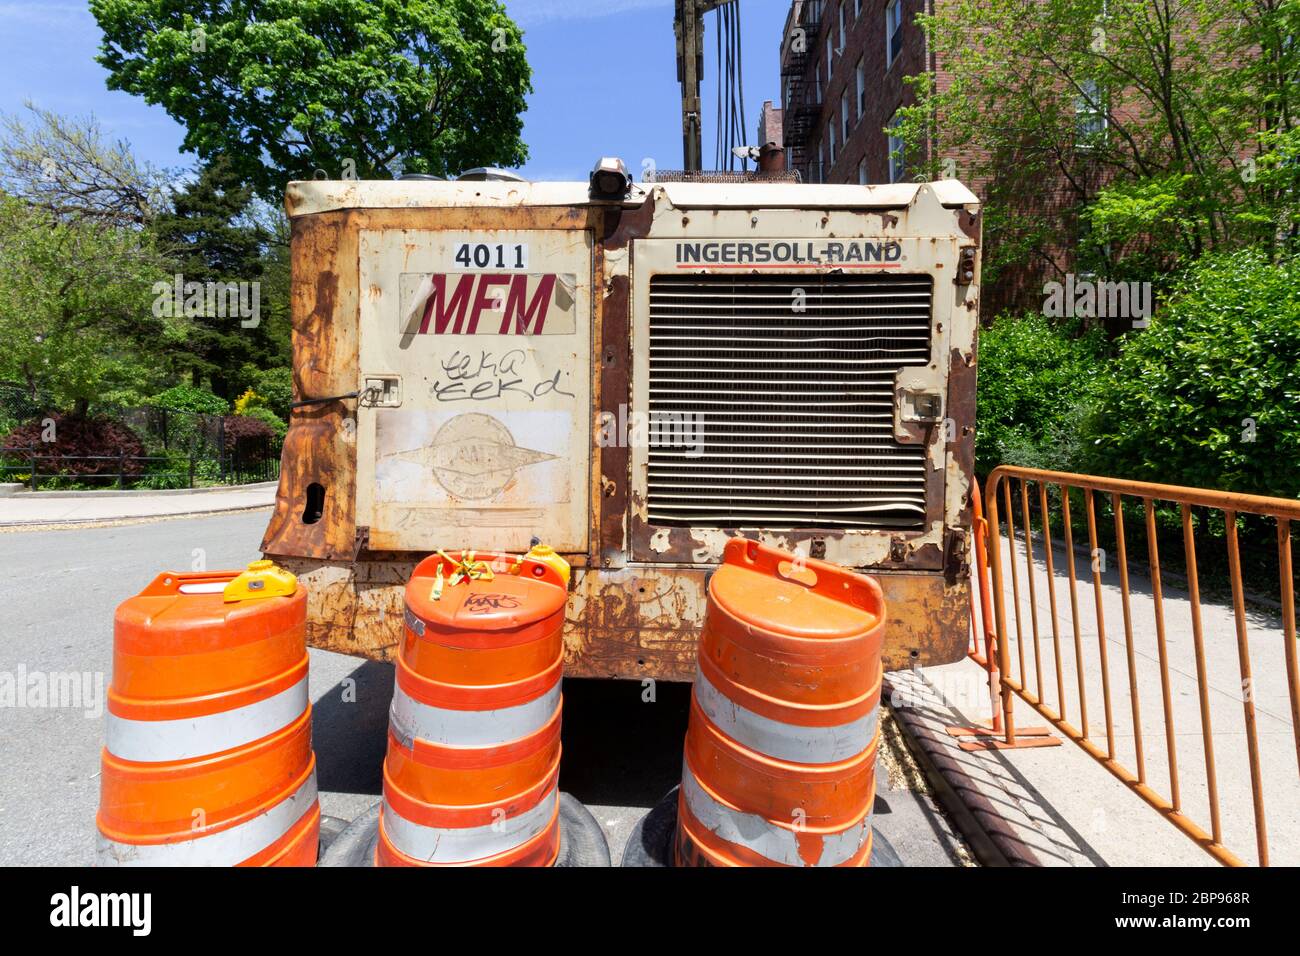 the back of a industrial bulldozer by Ingersoll Rand or Trane Technologies, with the brand name showing, parked on a new york city street Stock Photo